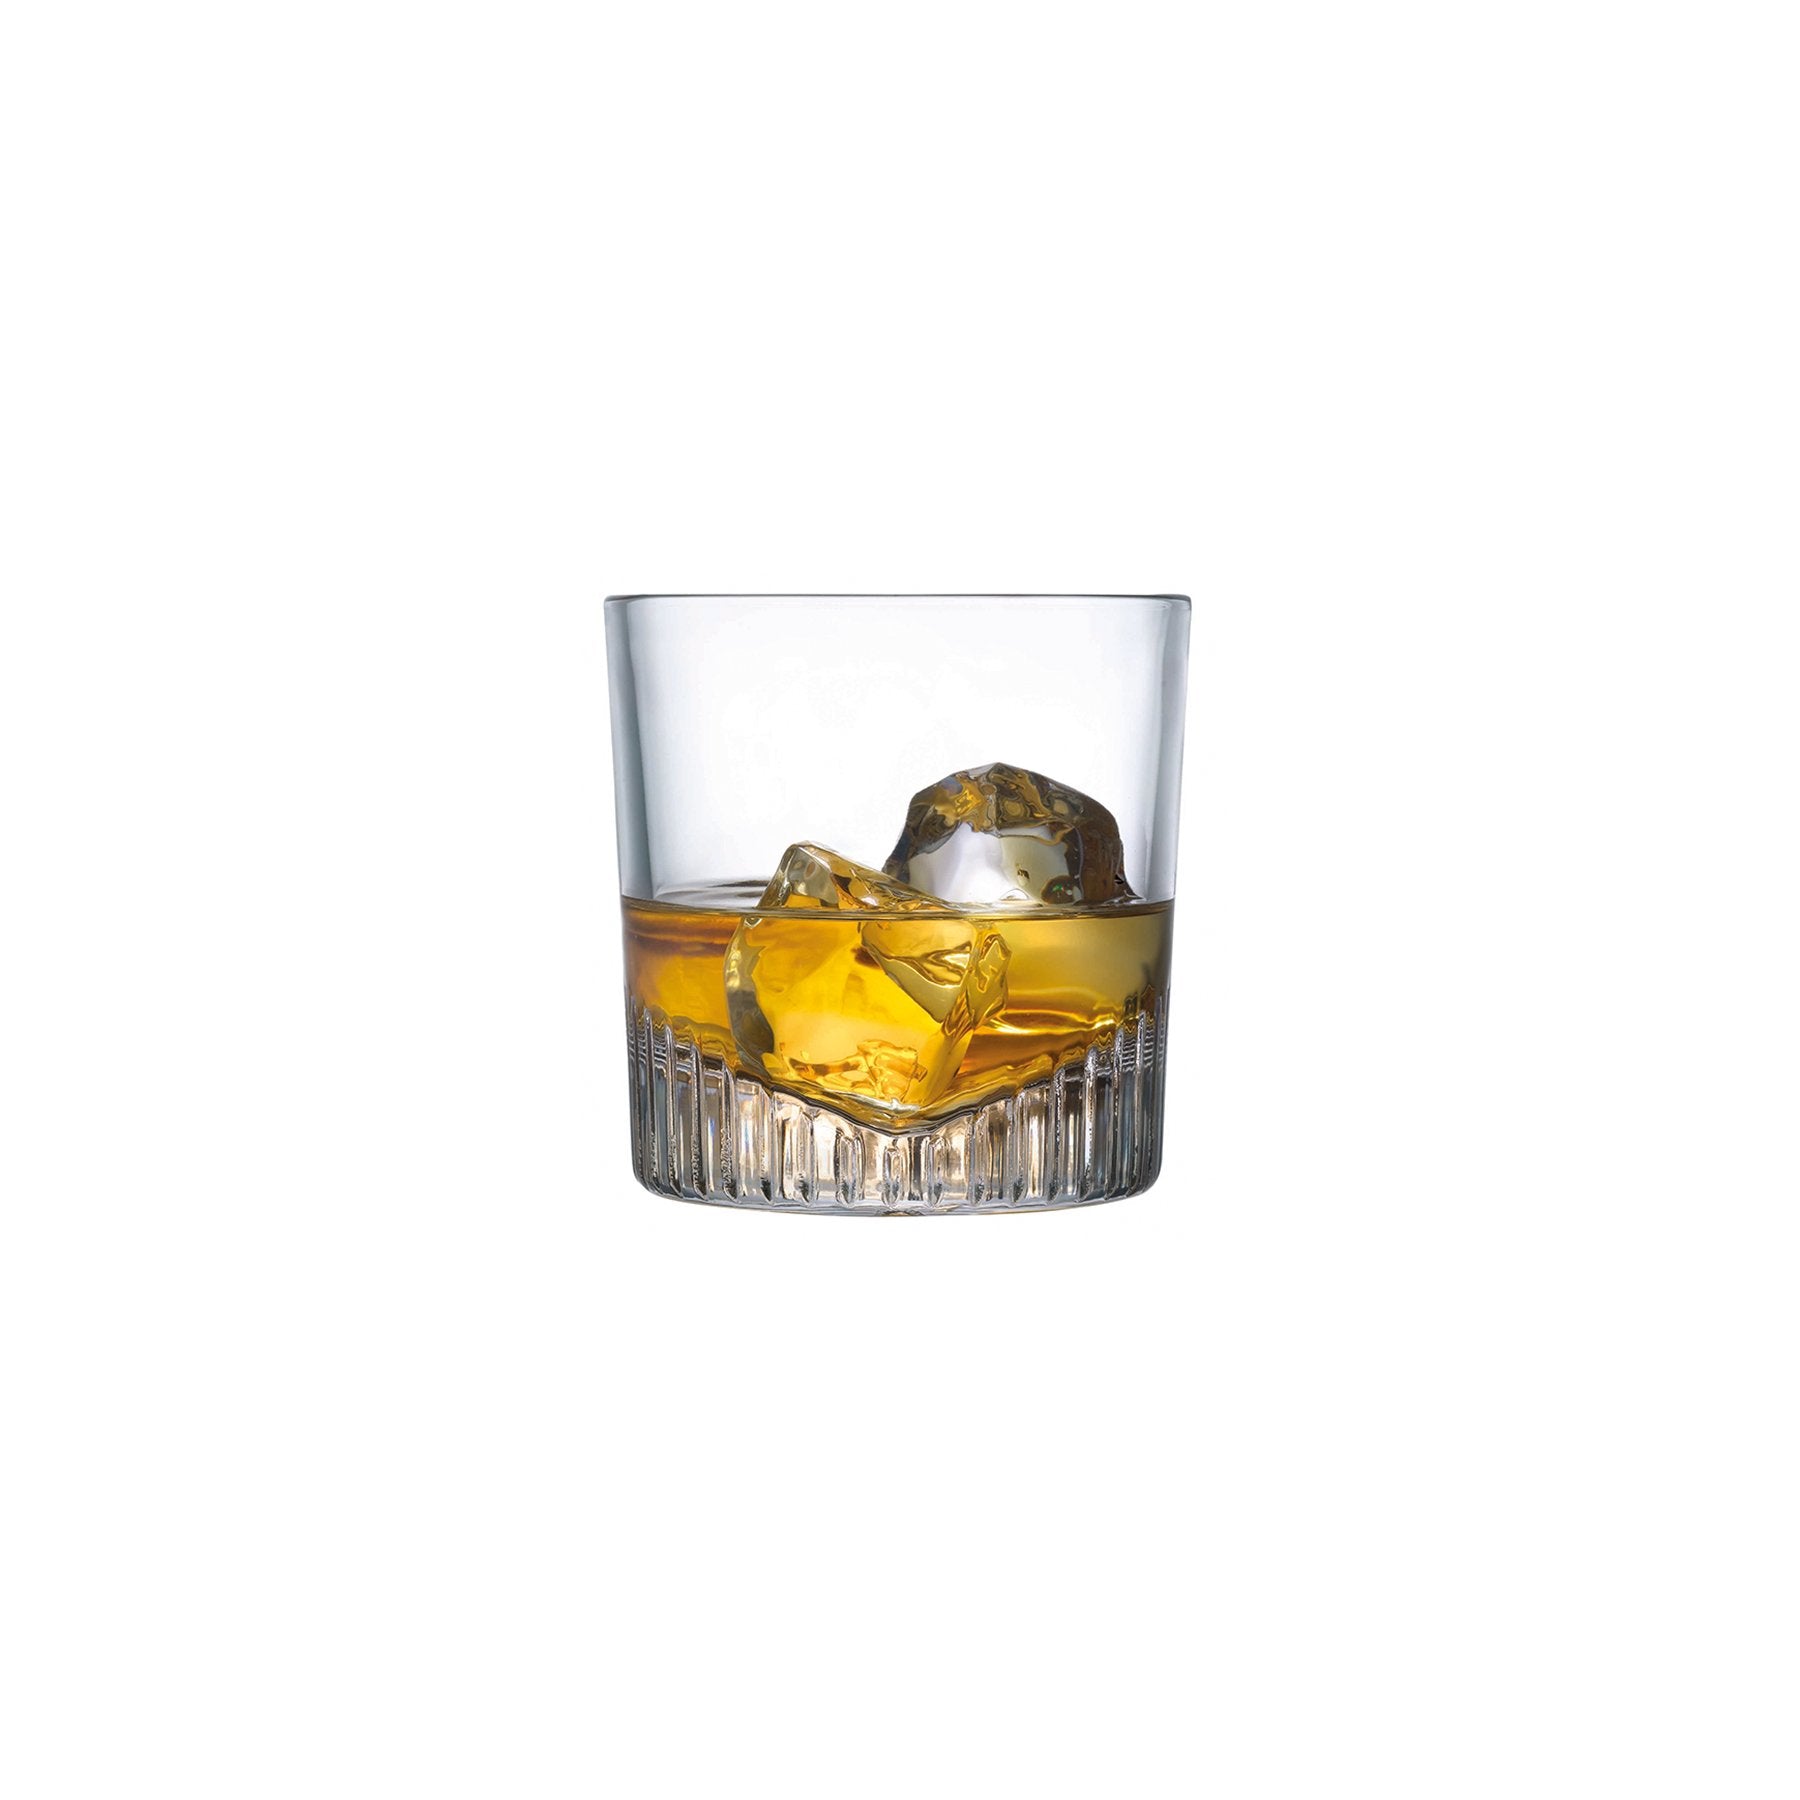 NUDE Caldera whisky glass filled with whisky